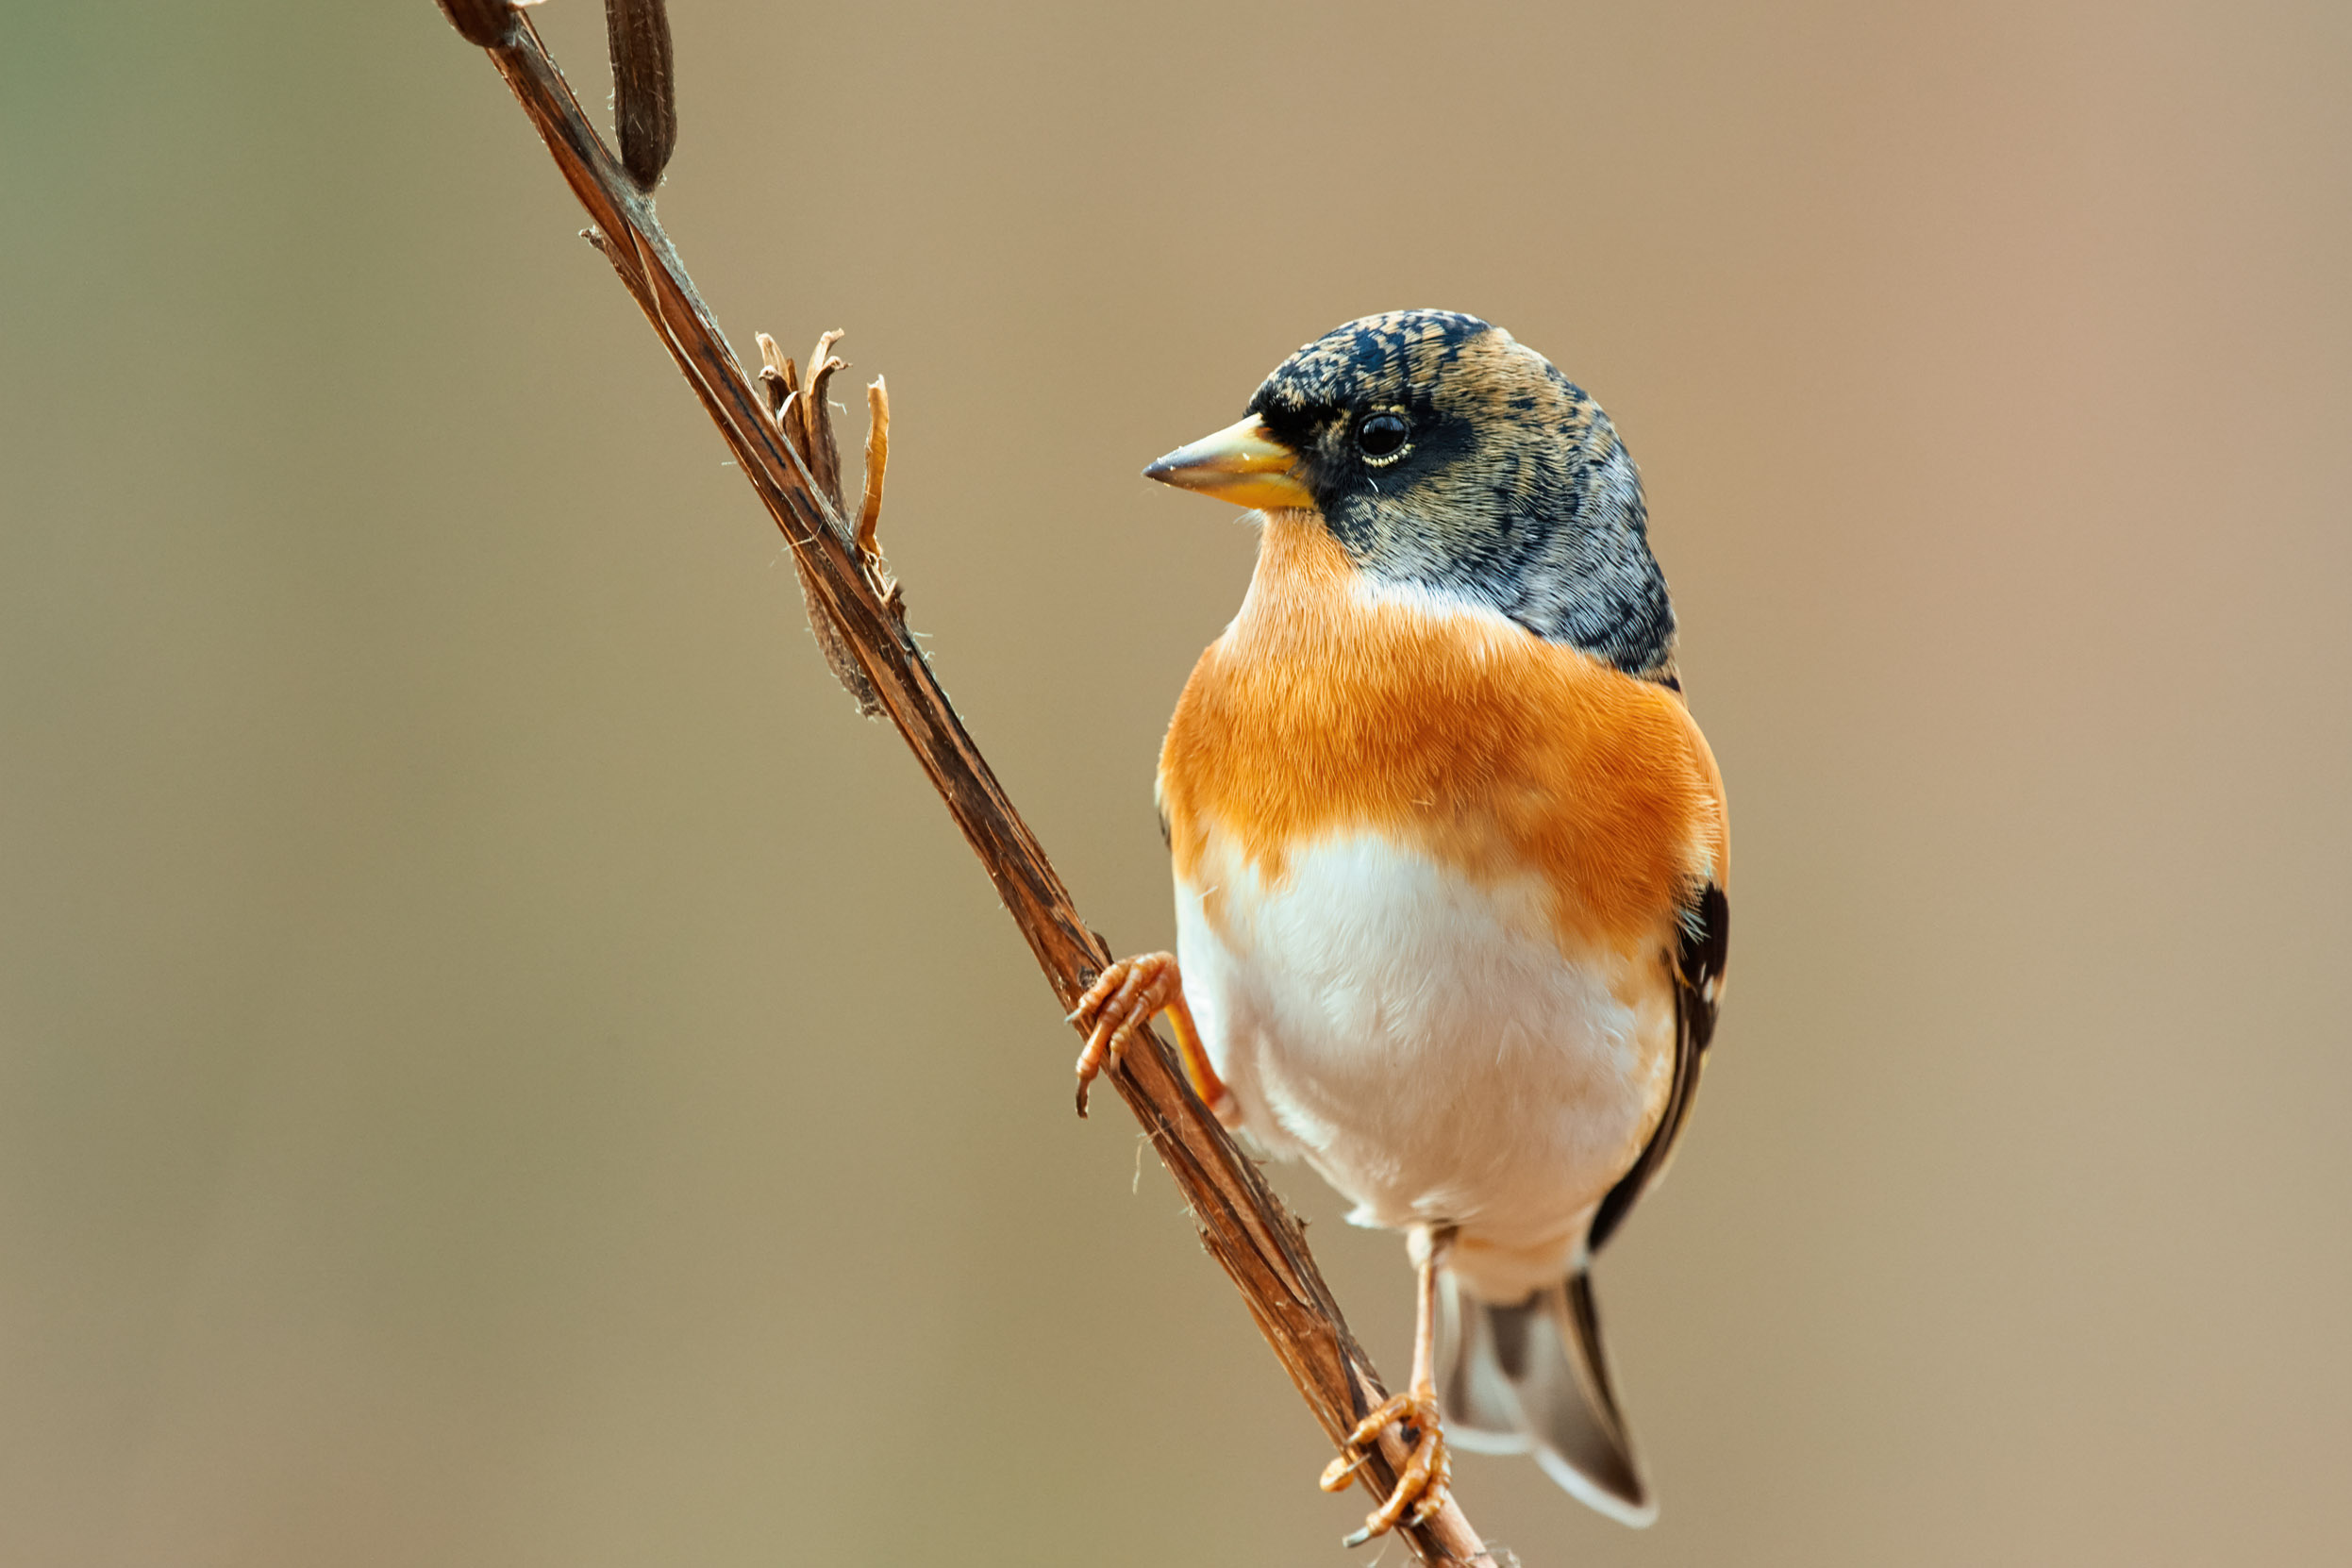 The male Brambling is perched sideways on a small branch.